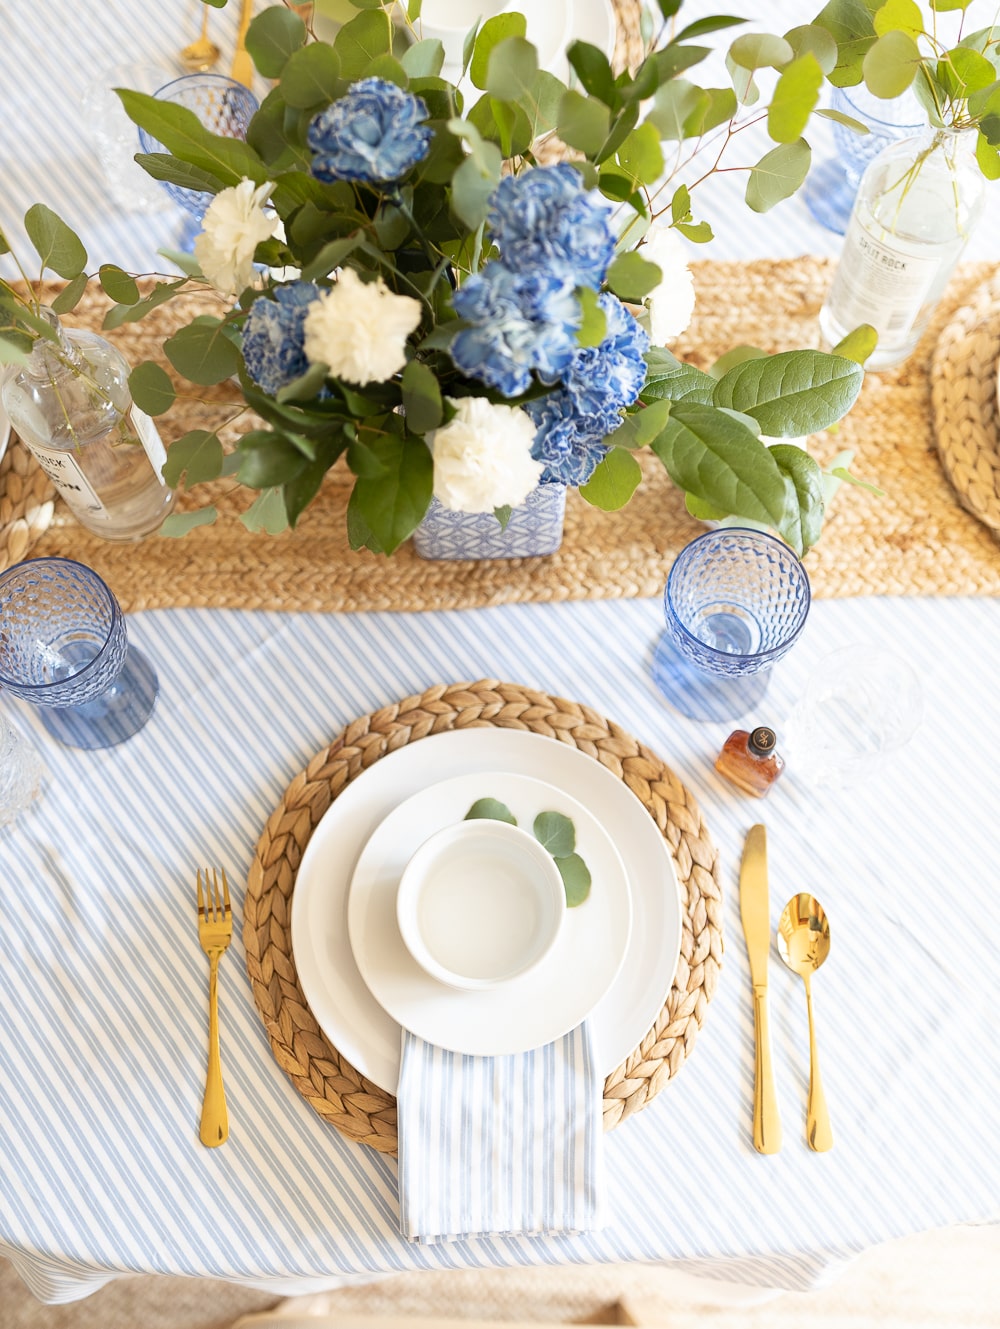 Father's Day table decorations from blogger Stephanie Ziajka on Diary of a Debutante